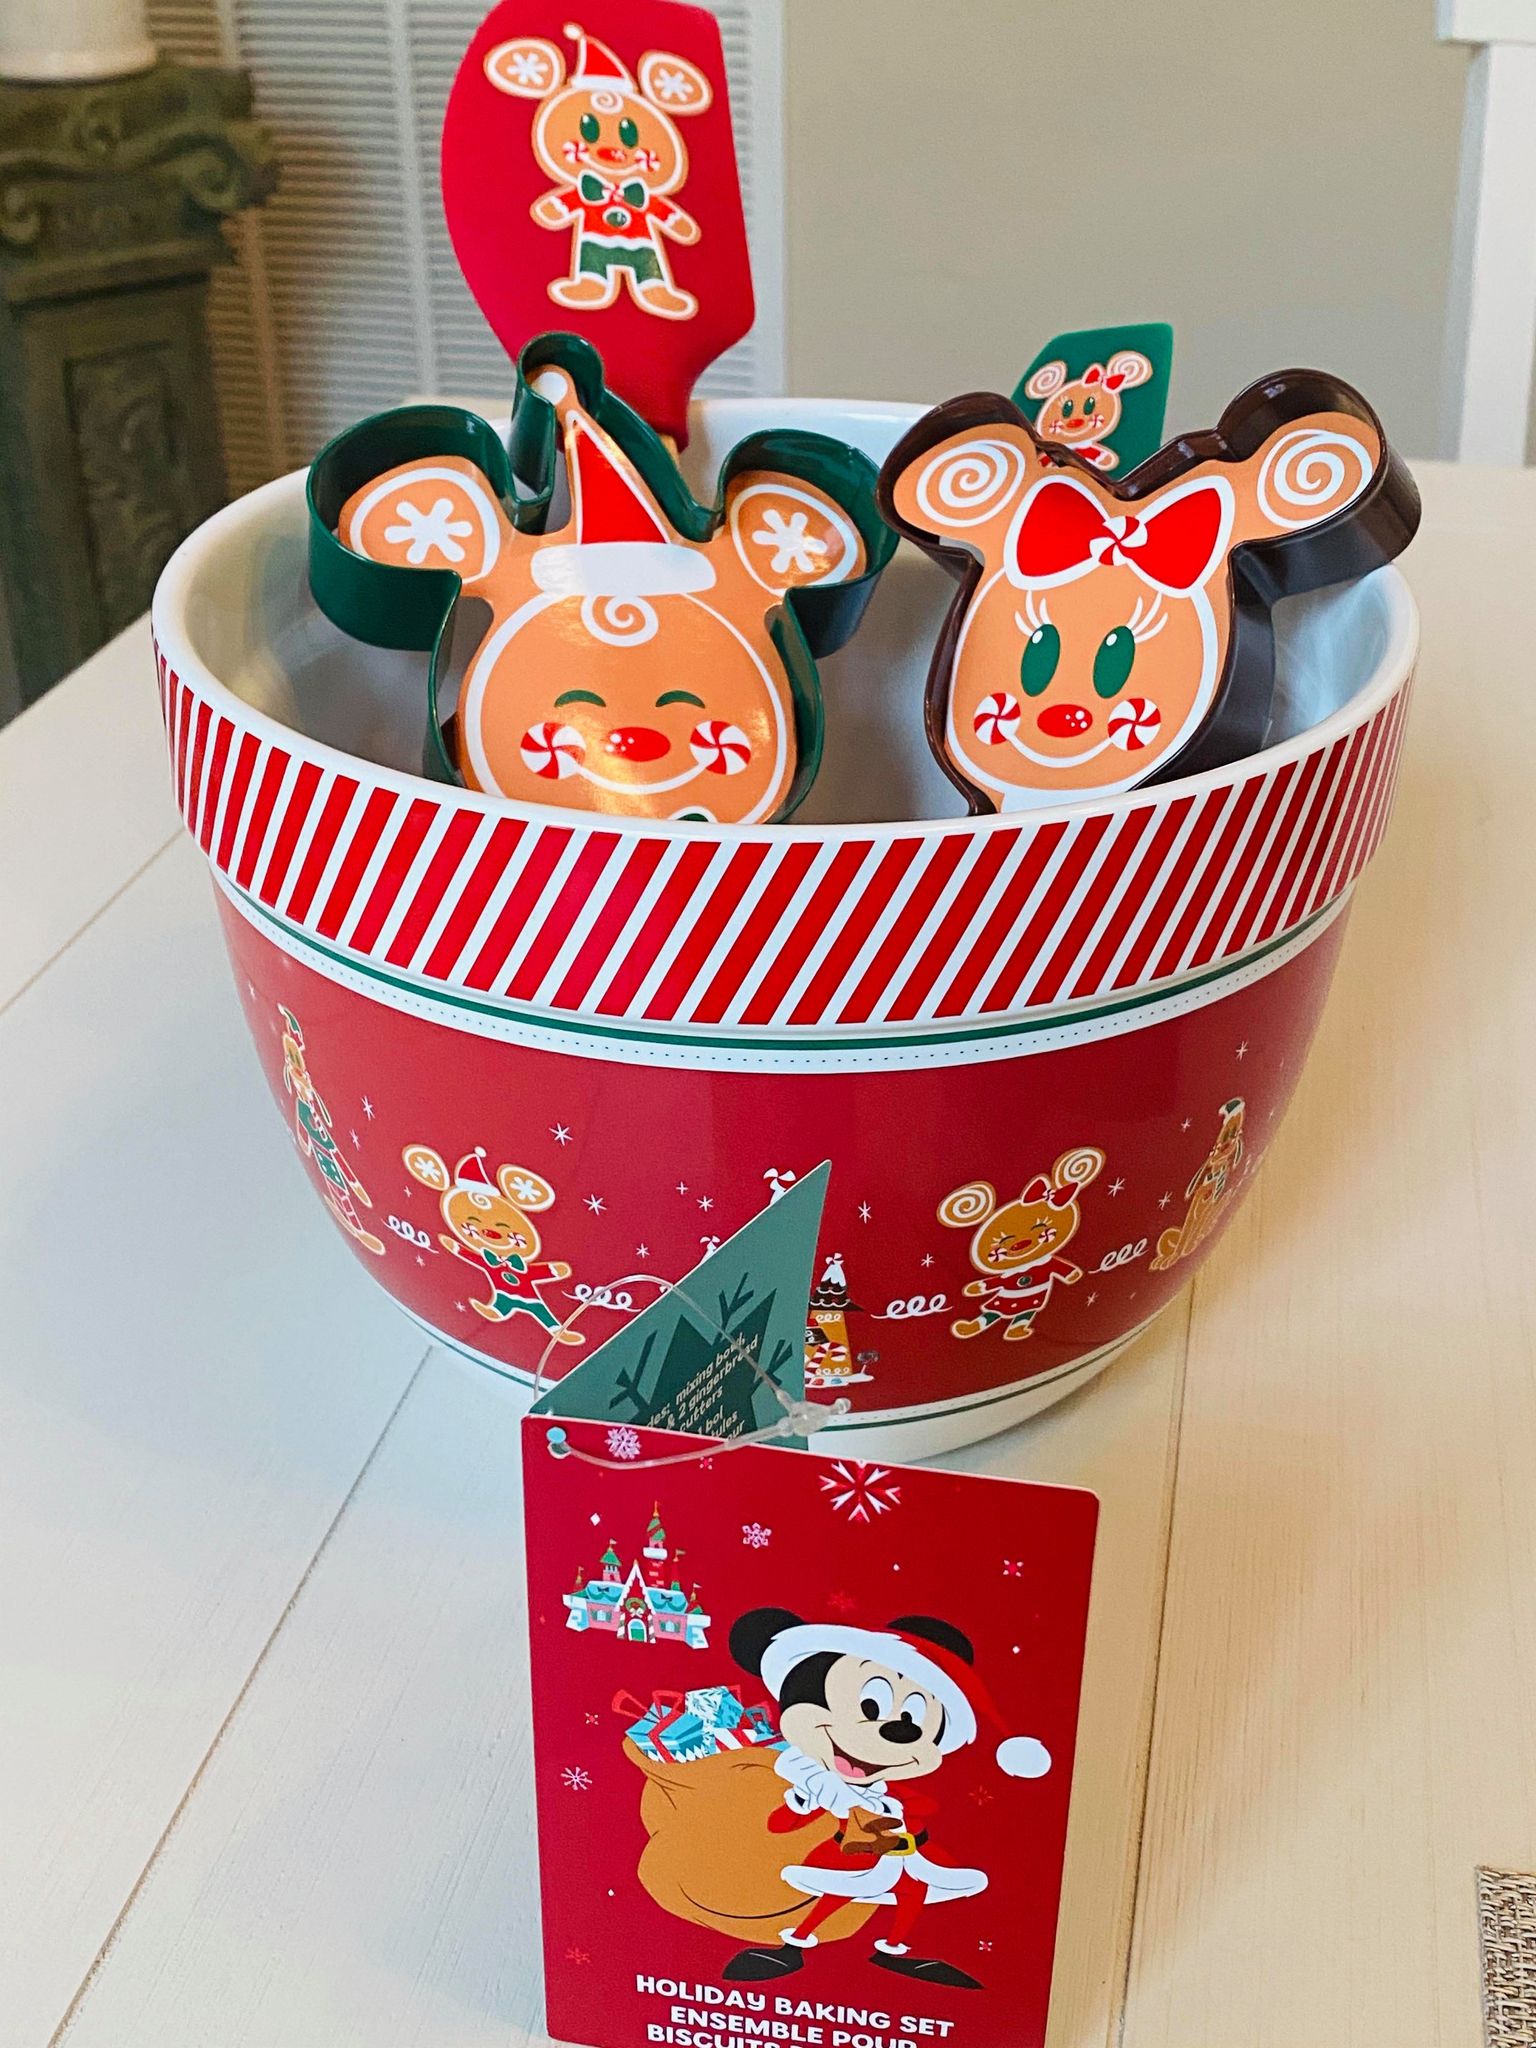 Mix Up Some Sweet Disney Treats with this Holiday Baking Set! Disney